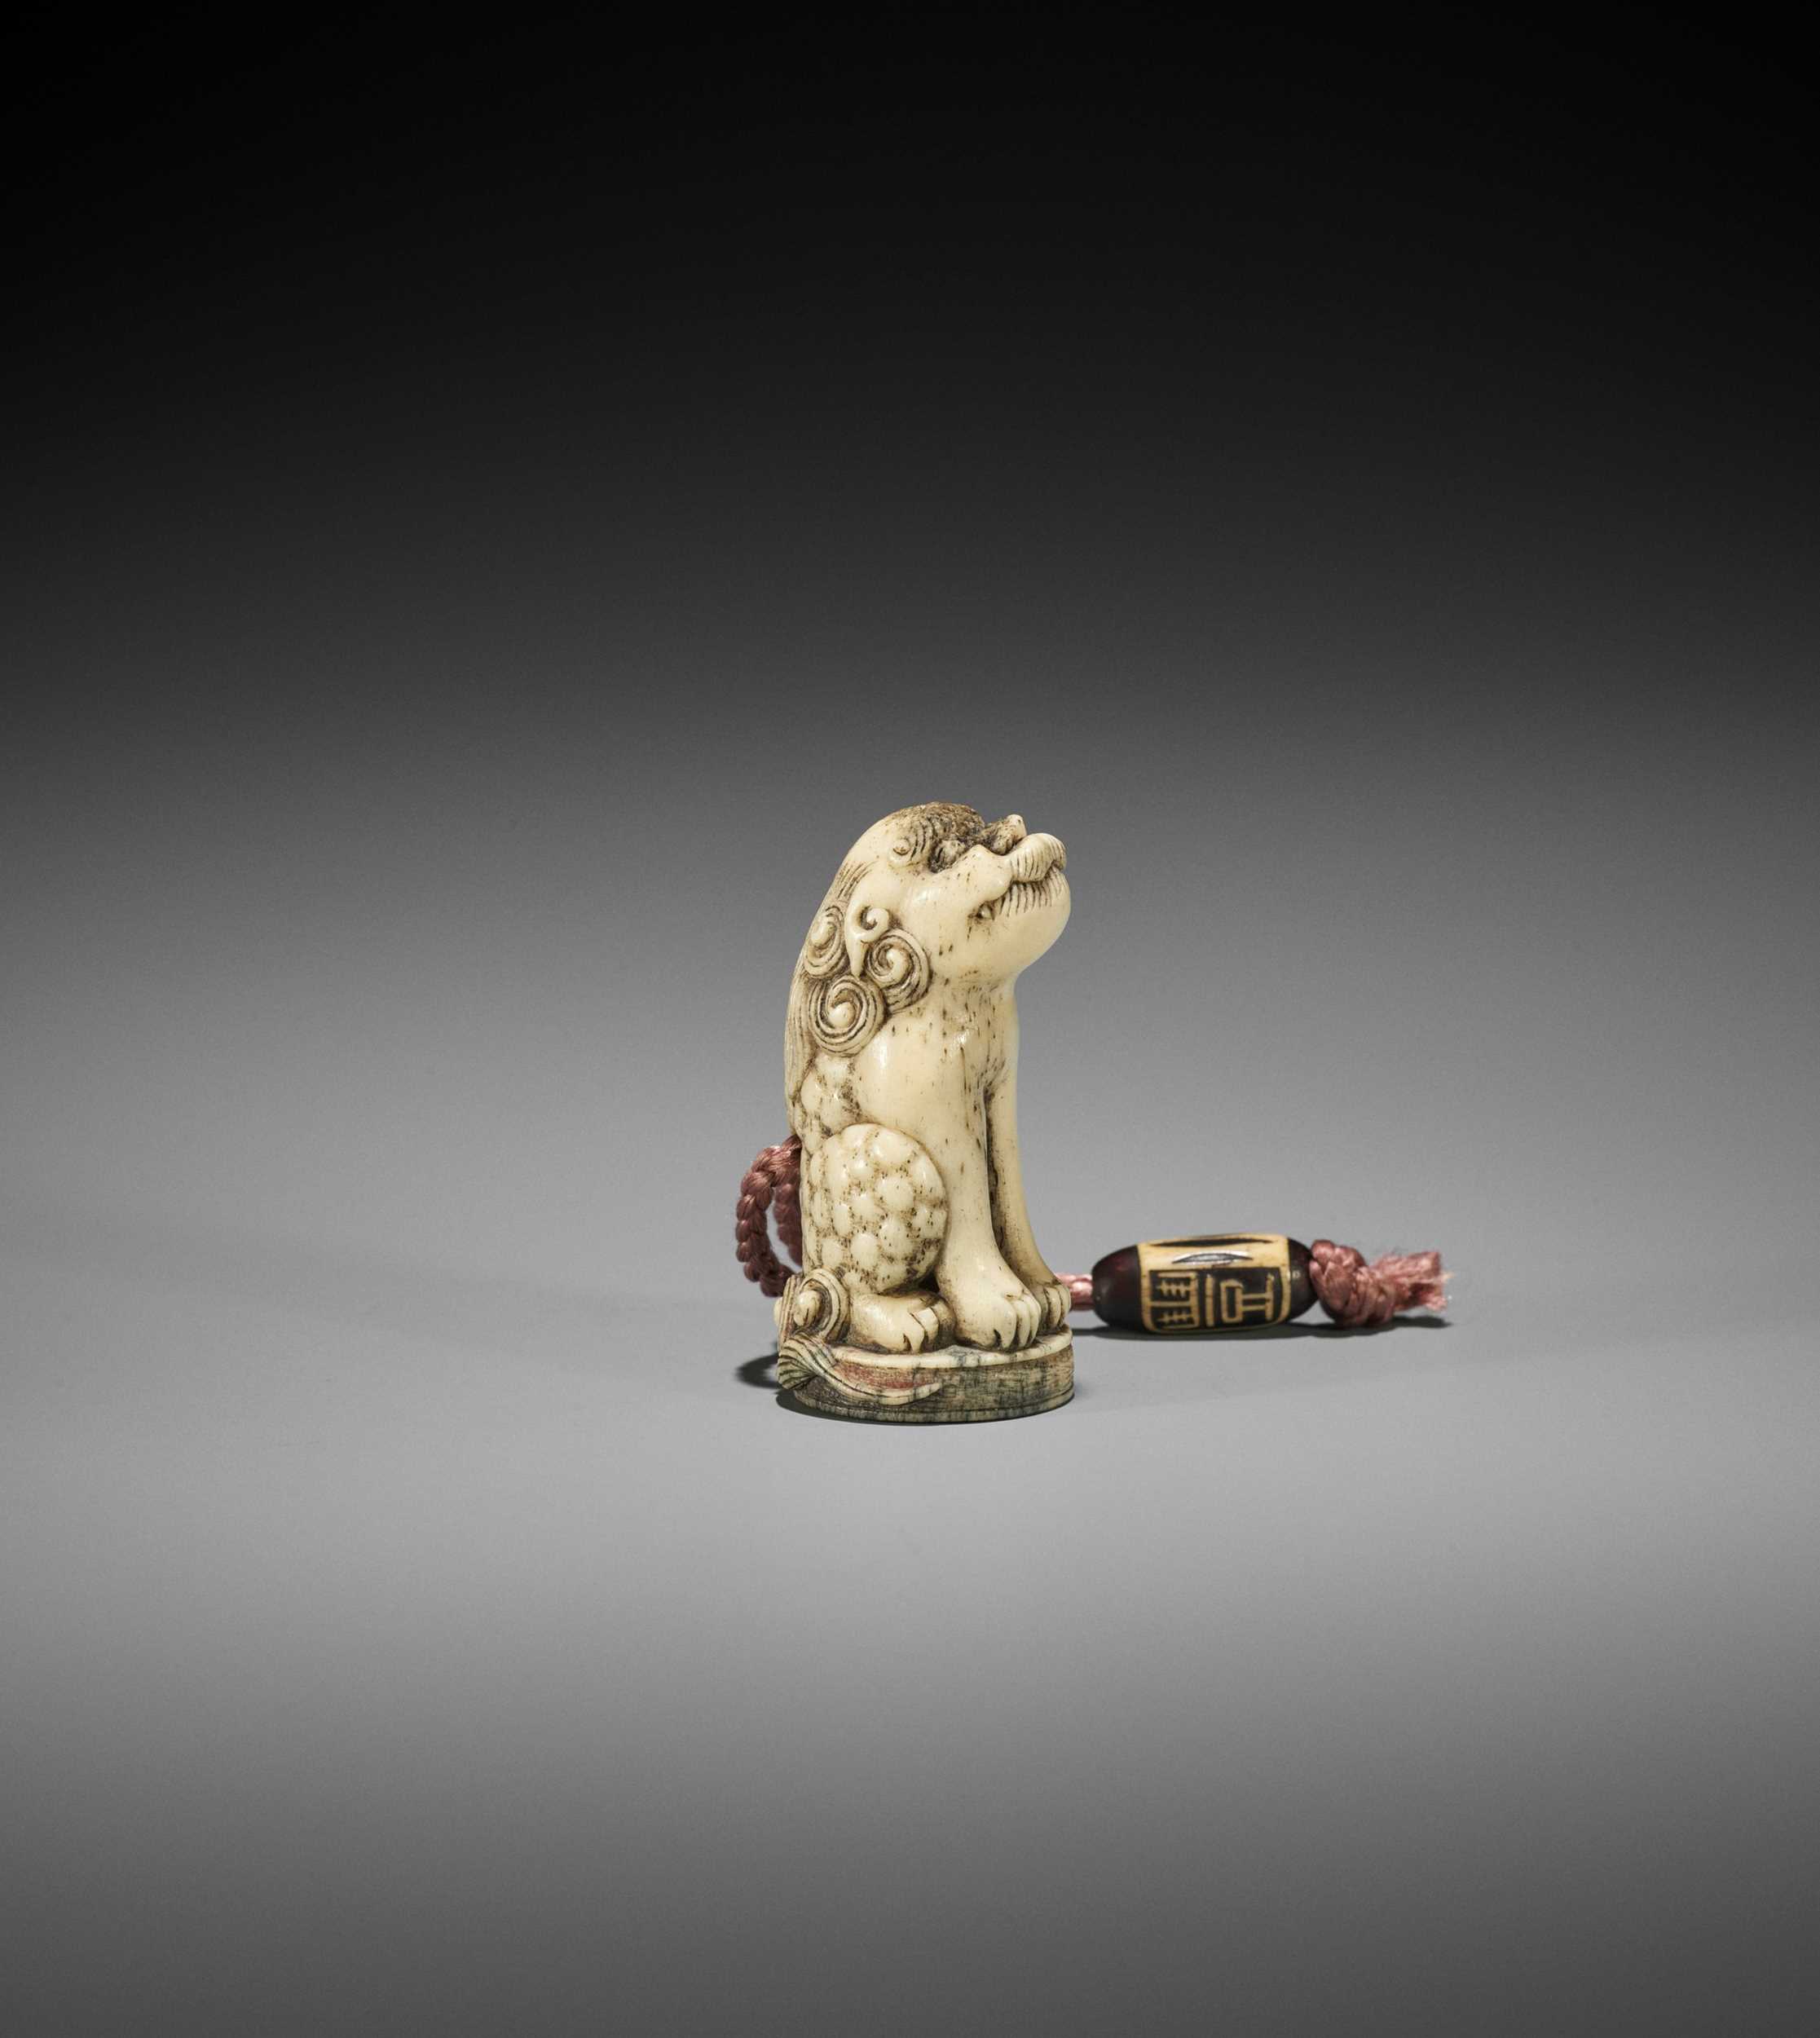 Lot 262 - A STAG ANTLER INGYO NETSUKE OF A SHISHI WITH STAG ANTLER OJIME